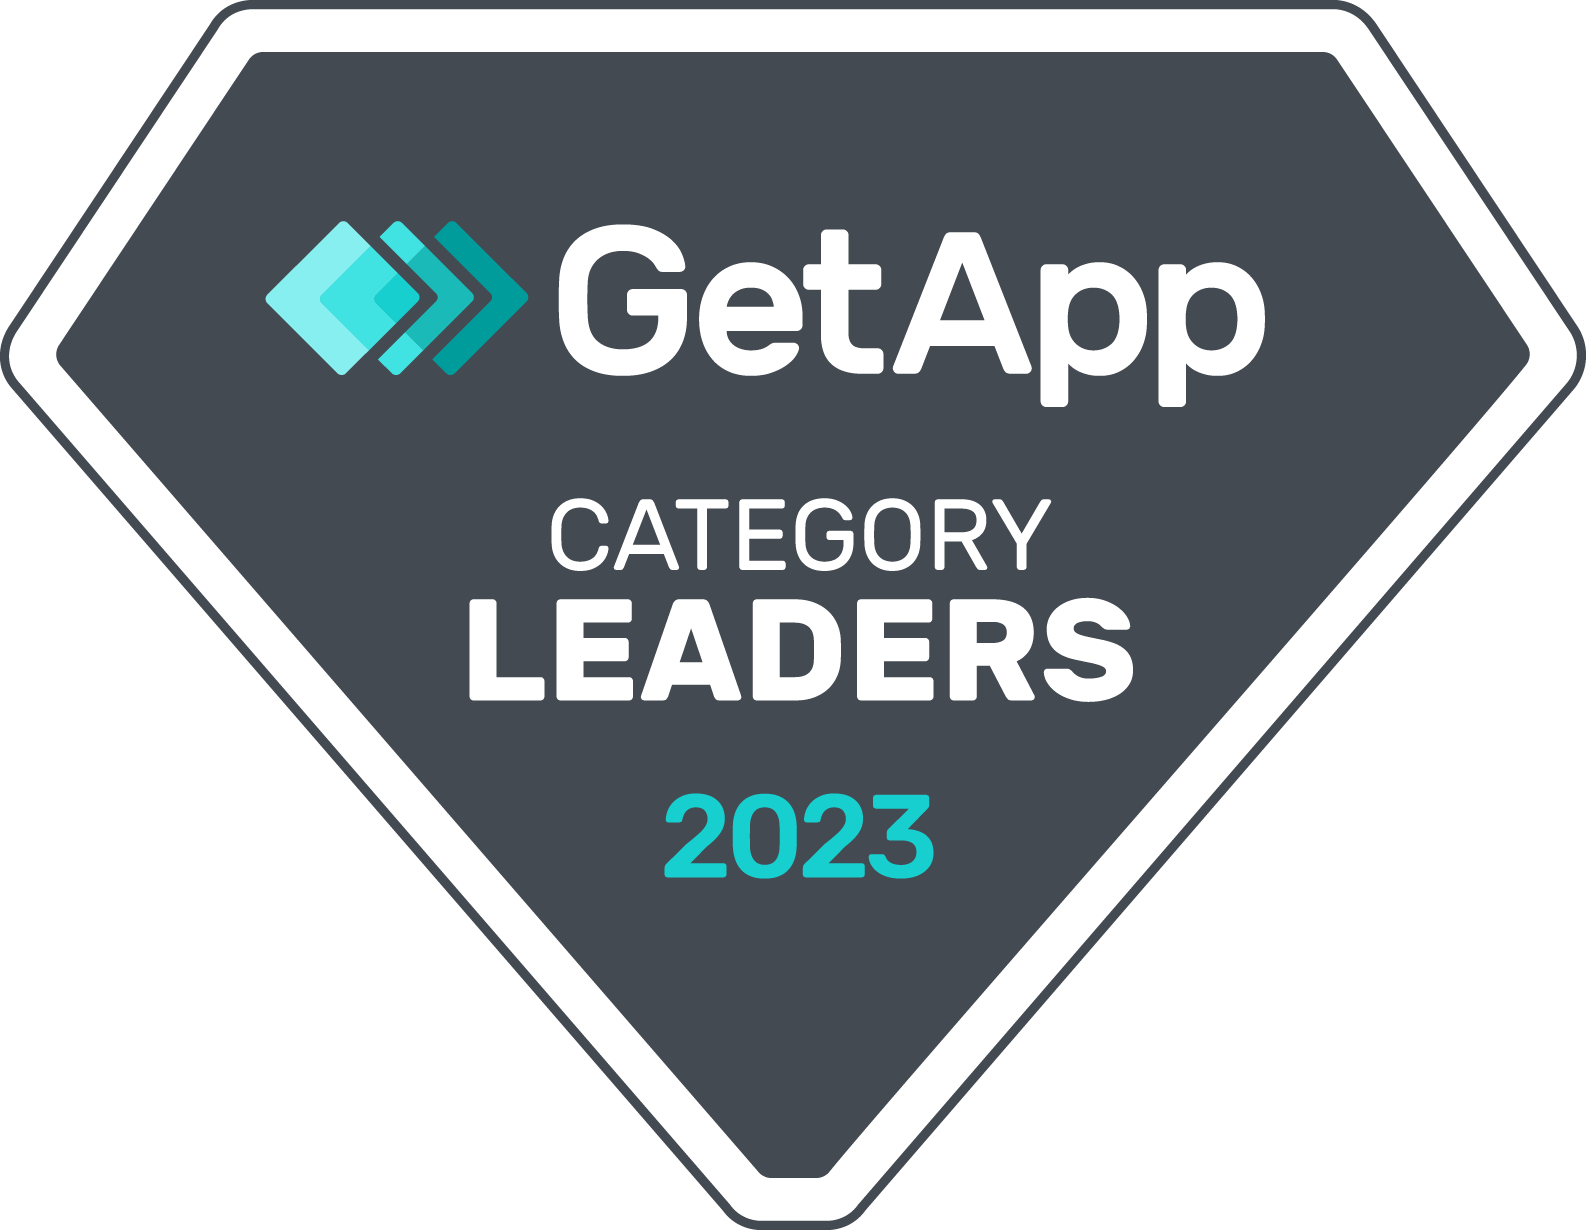 Logo of "GetApp Category Leaders 2023 in Help Desk Software" on a diamond-shaped badge featuring turquoise and grey colors.